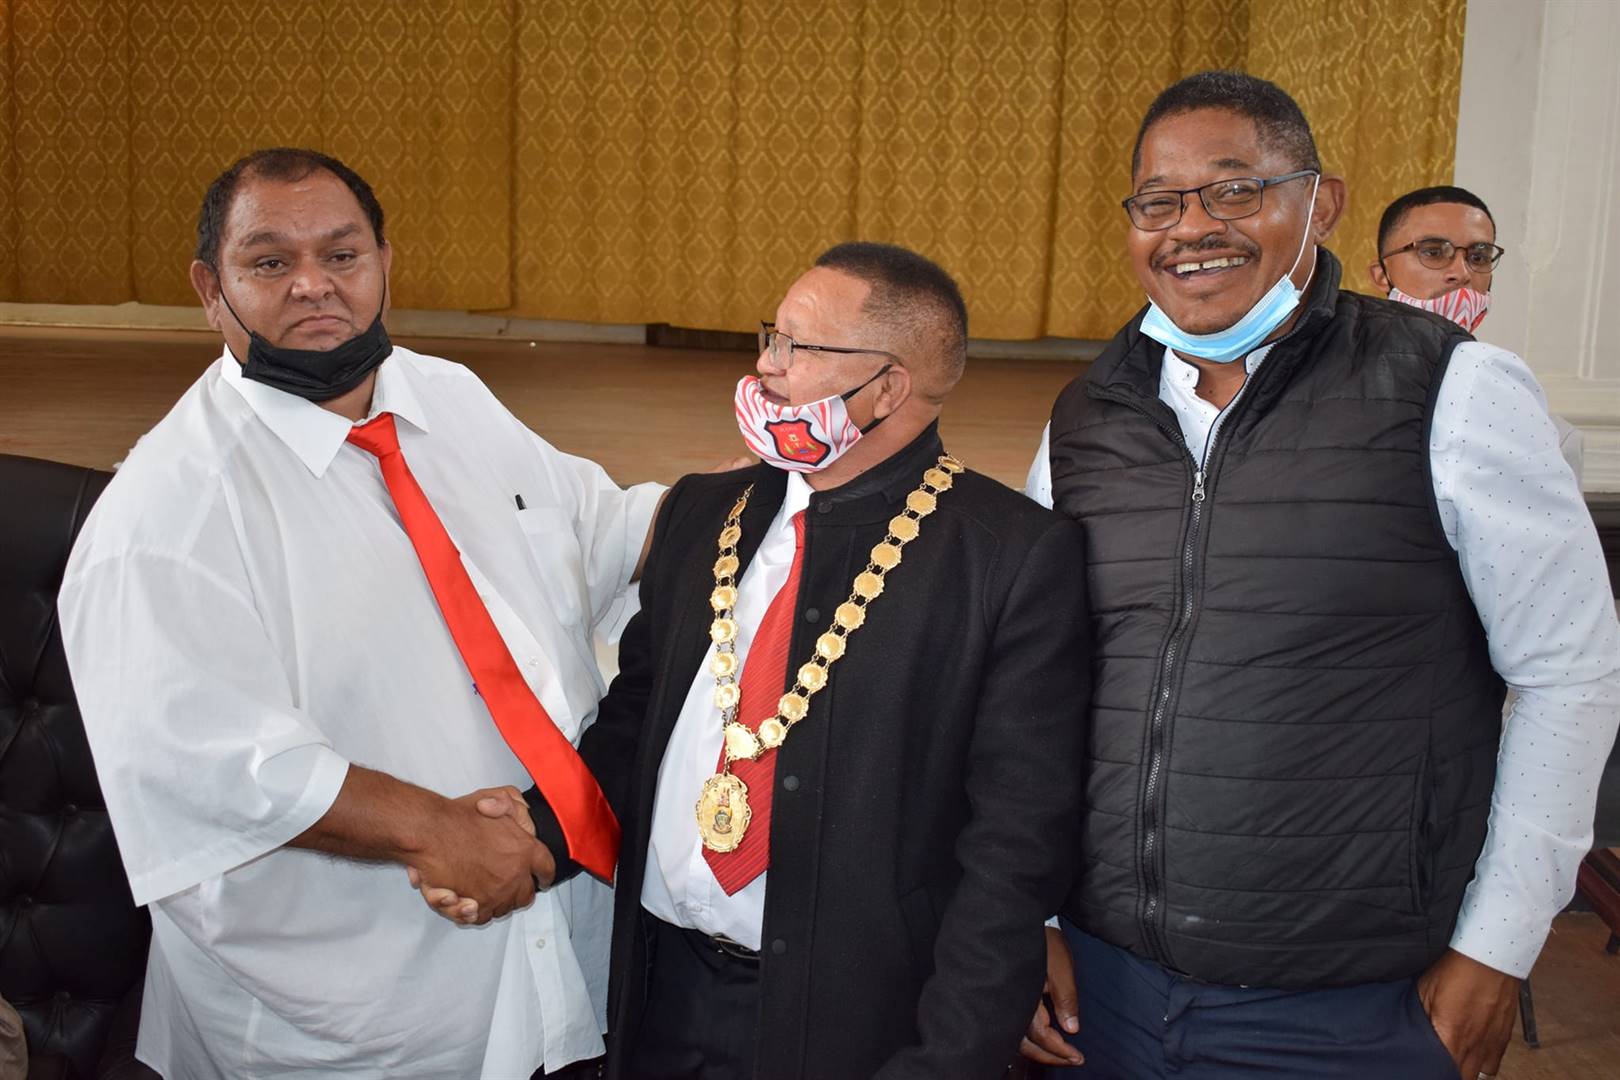 Icosa councillor Hyron Ruiters congratulates Jeffrey Donson after his election as Kannaland mayor, with his deputy, Werner Meshoa, also in attendance.